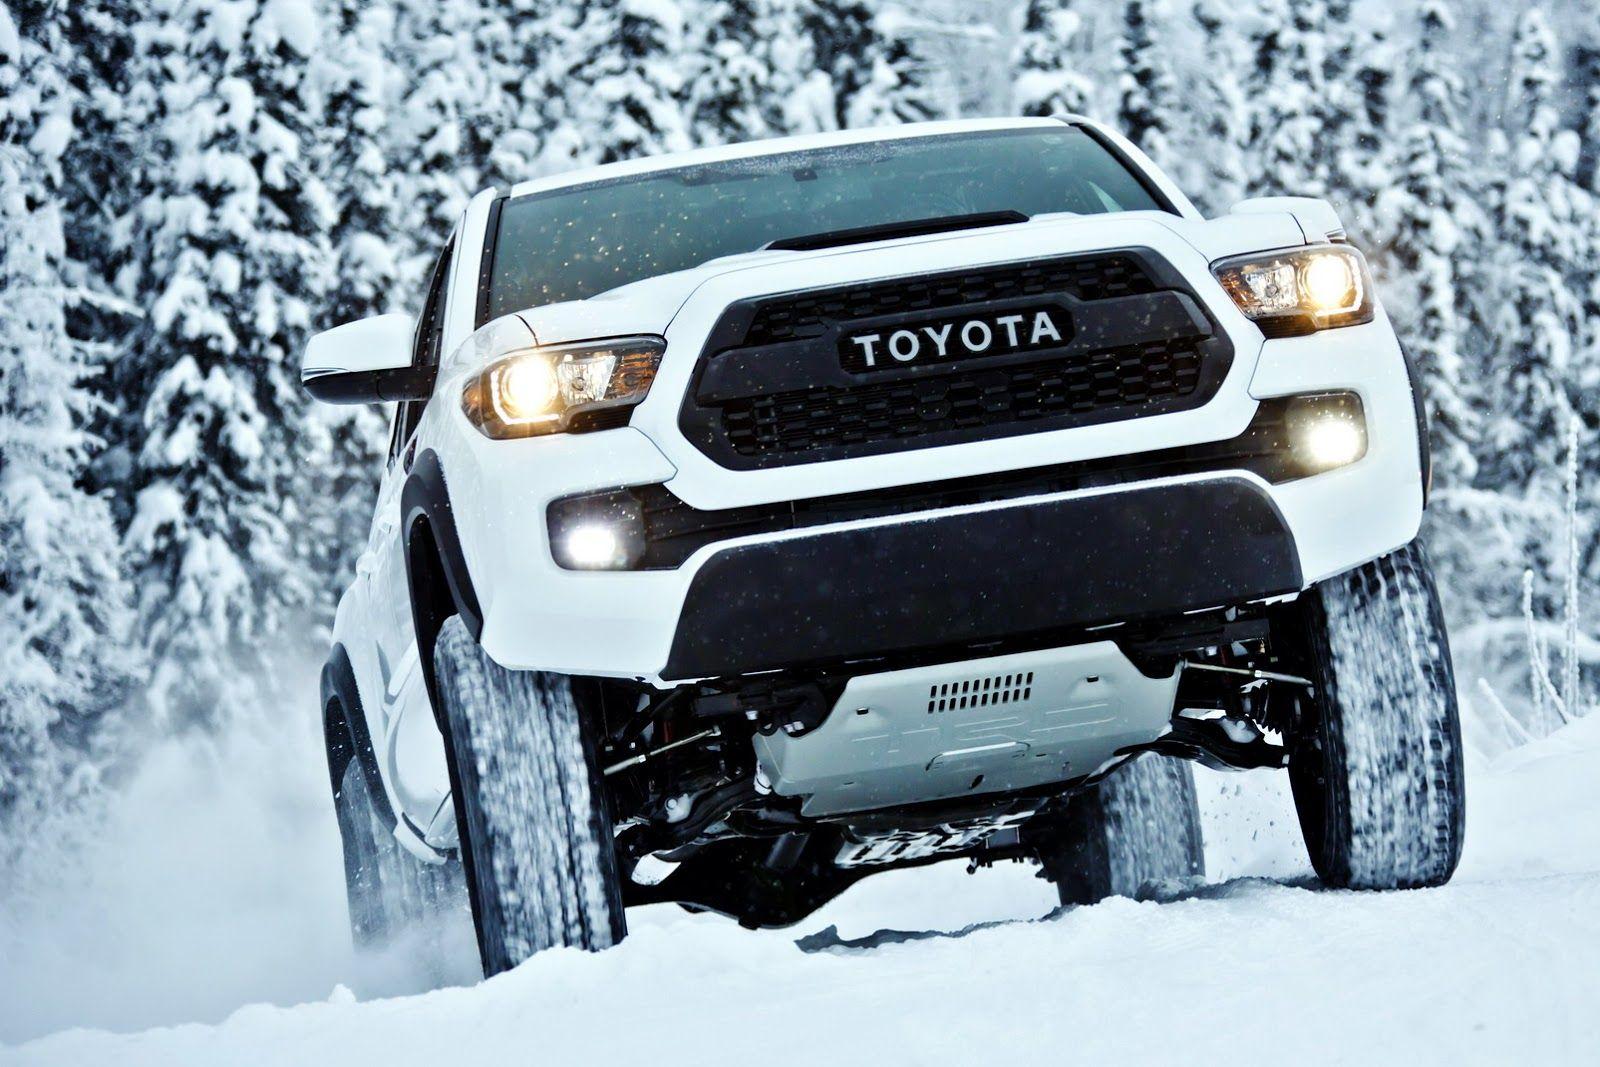 Toyota Tacoma TRD Pro Is A Small But Extreme Off Road Pickup